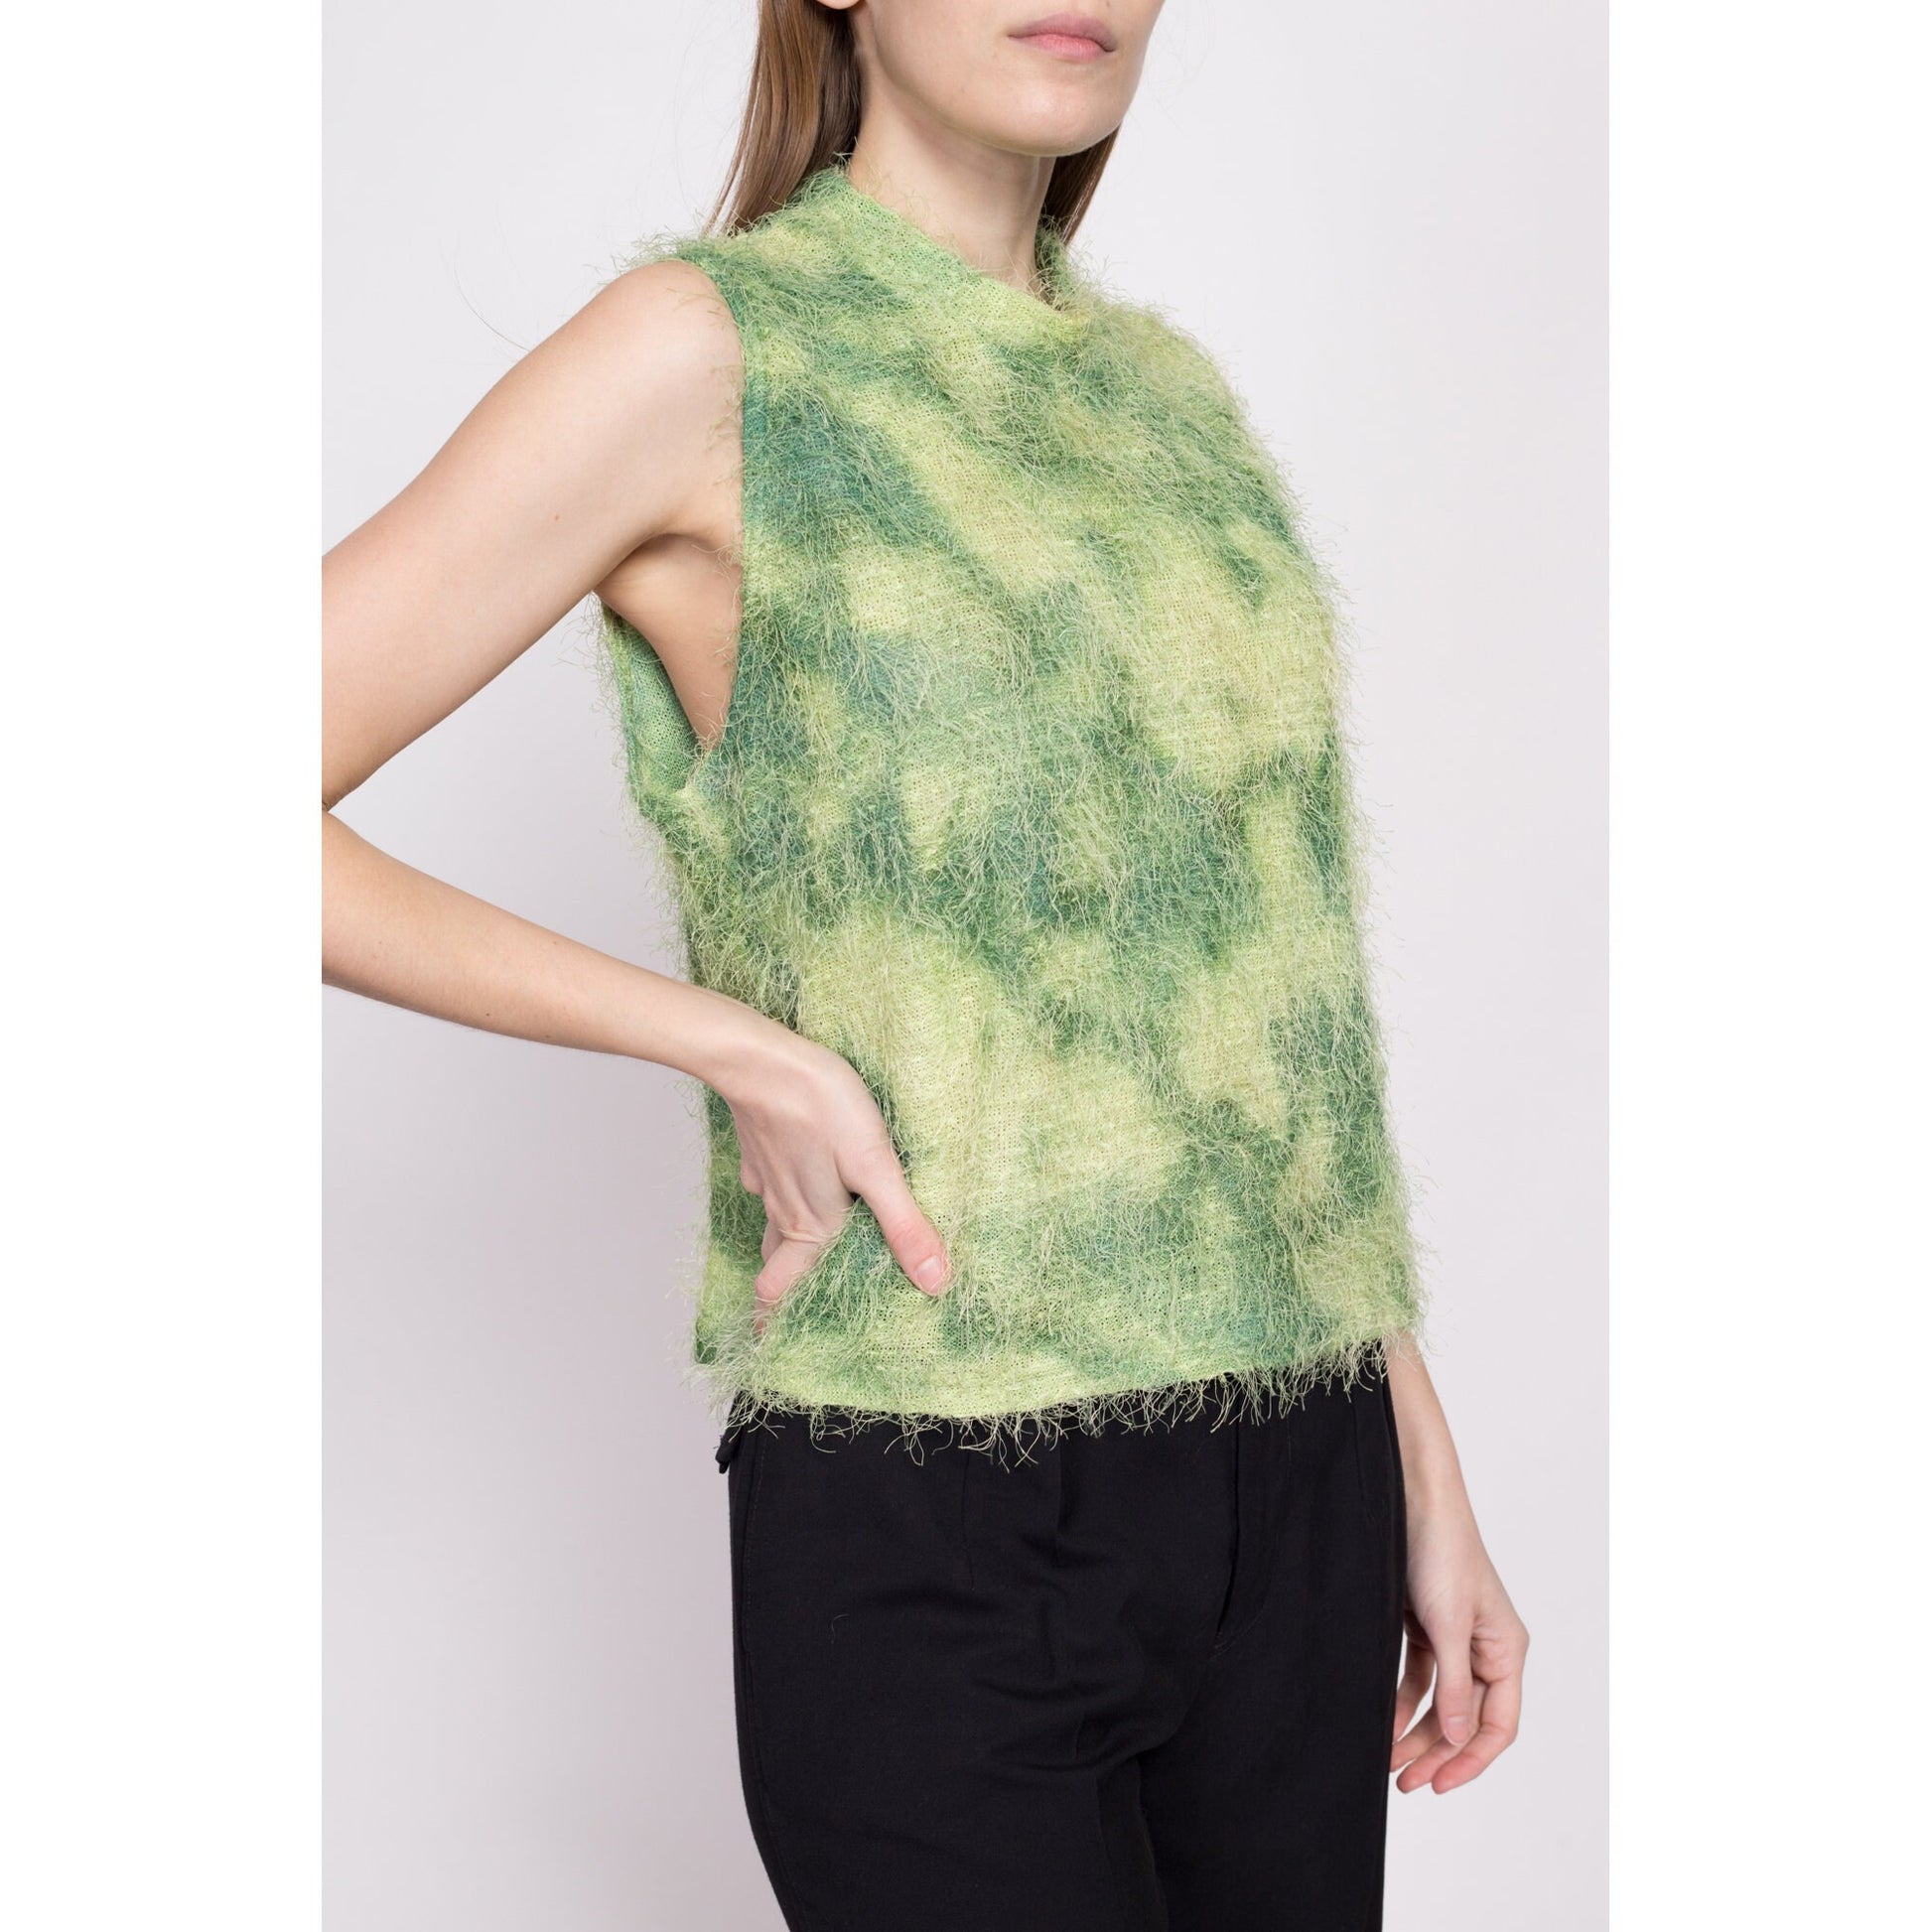 Y2K Green Shaggy Knit Top - Extra Large | Vintage Sleeveless Abstract Camo High Neck Shirt